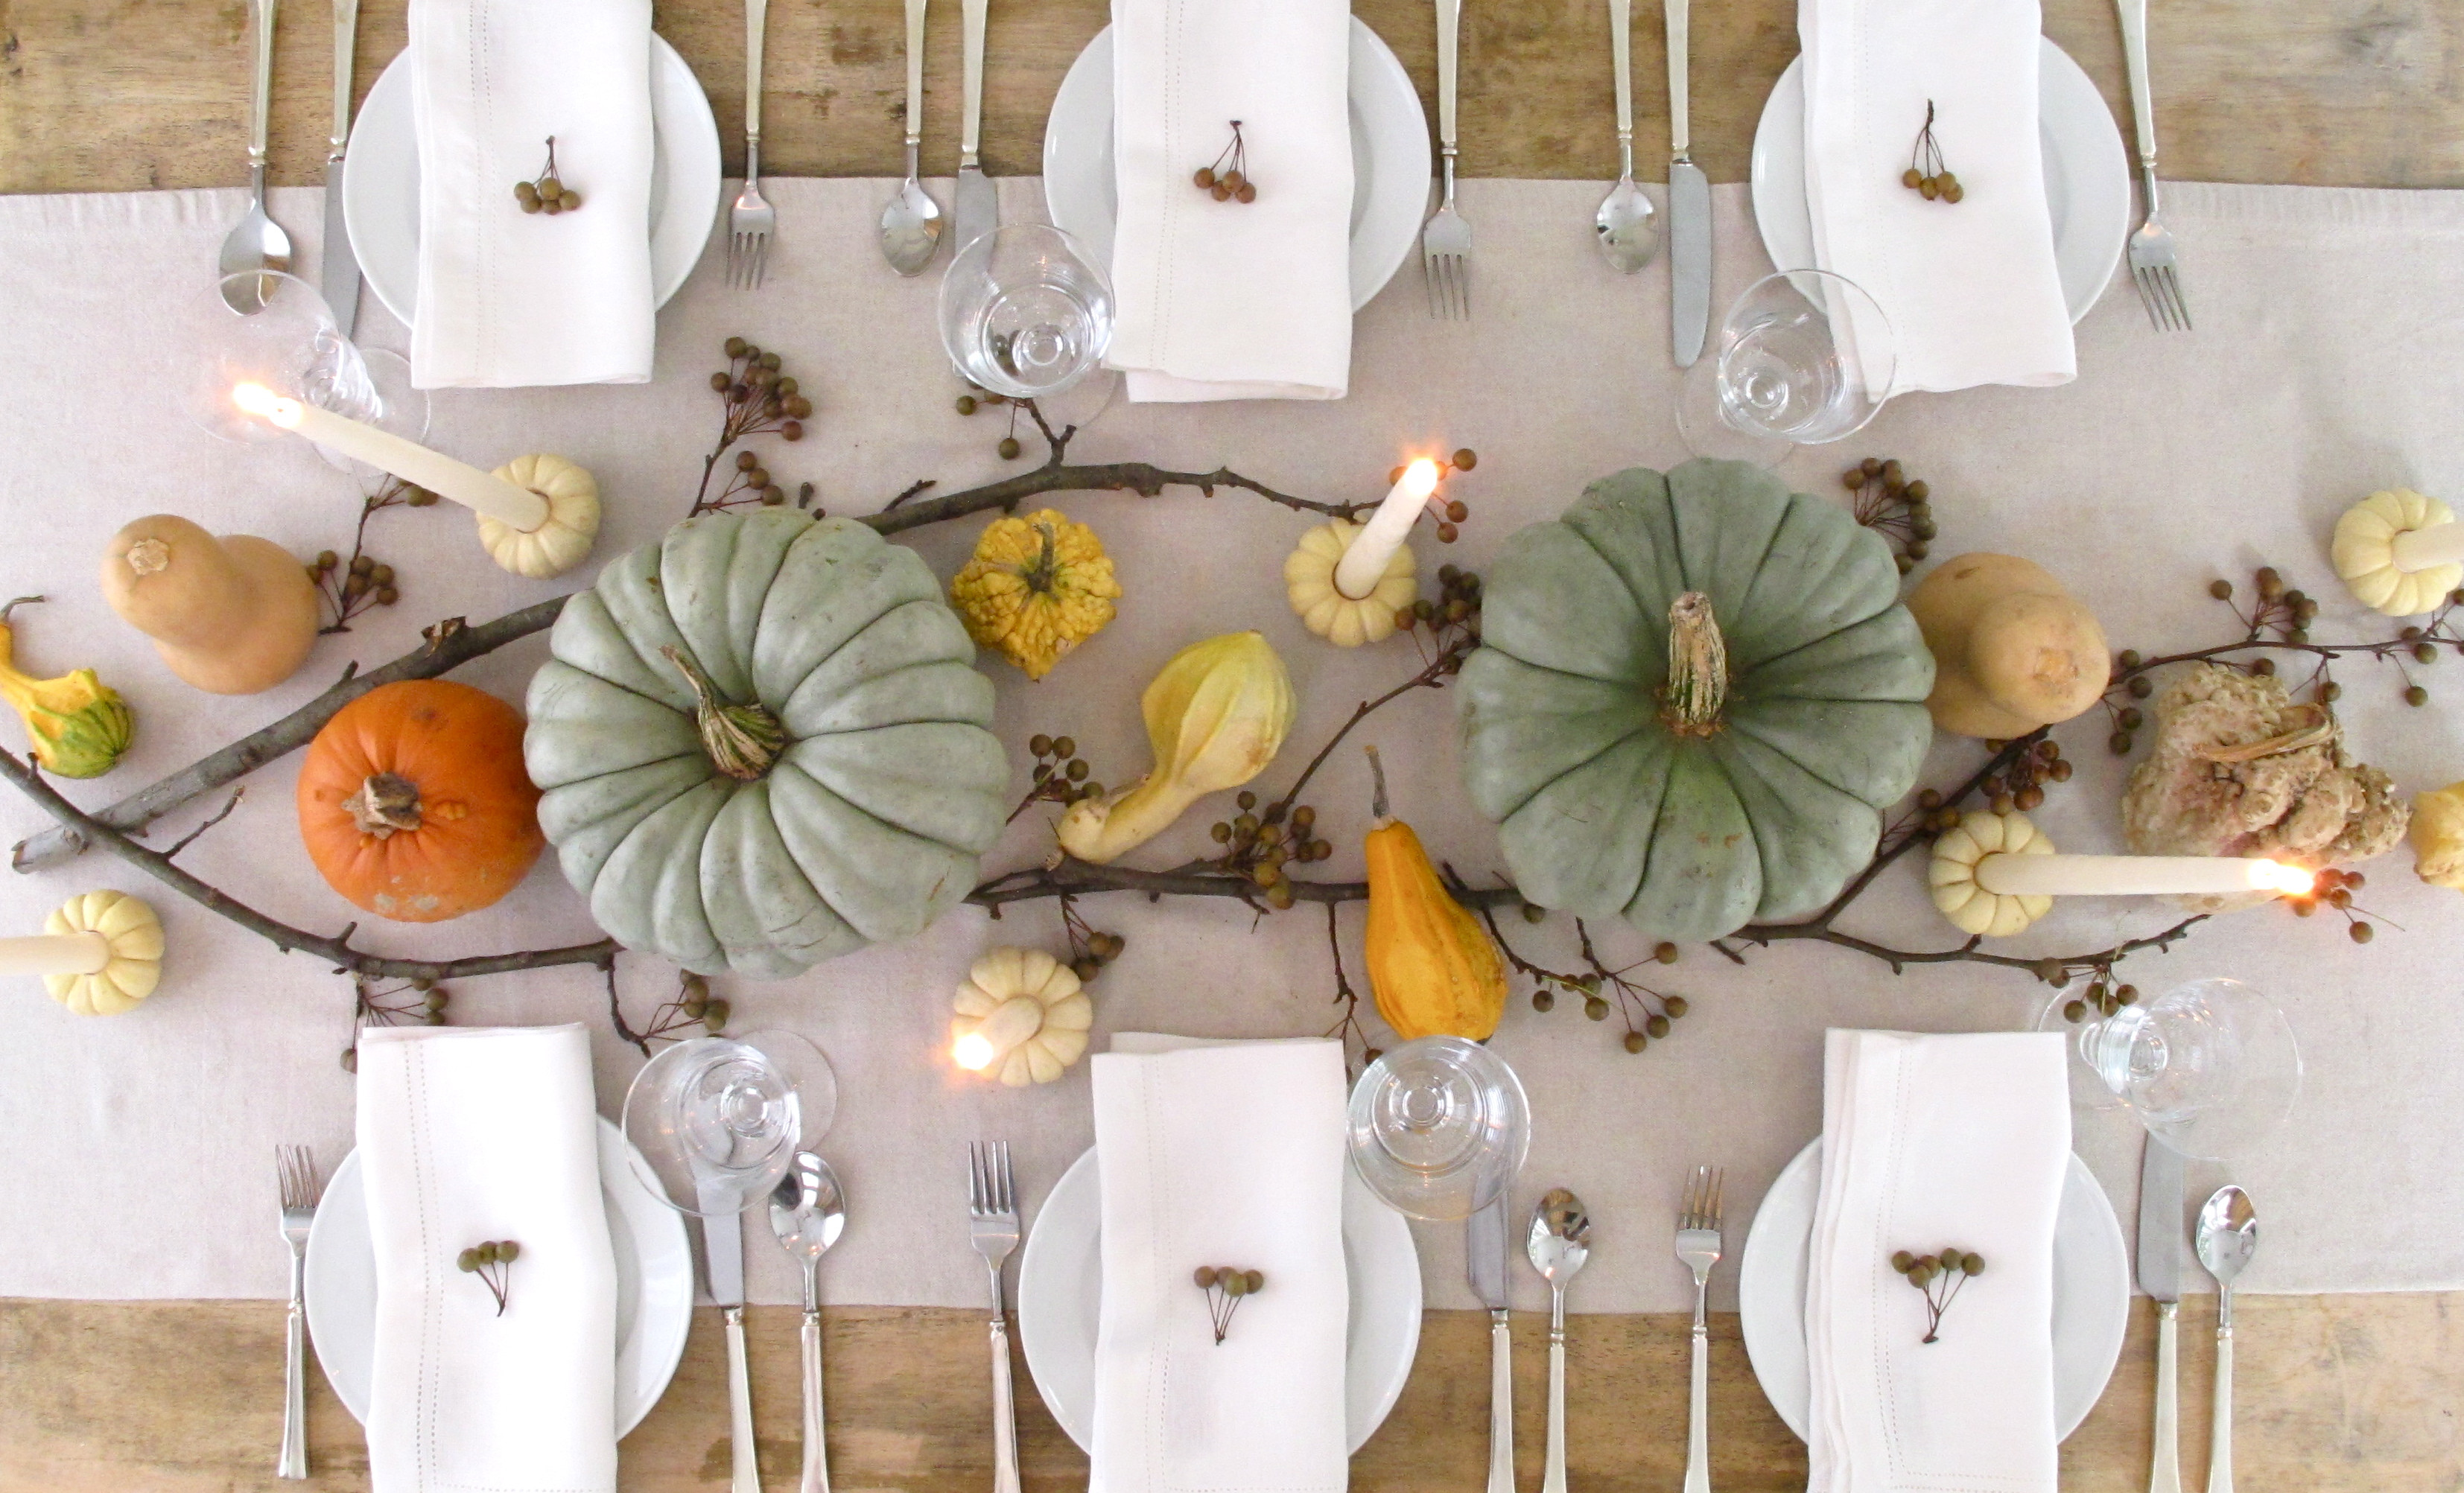 Thanksgiving Table Decorating Ideas
 Our favorite Thanksgiving Day table settings TODAY